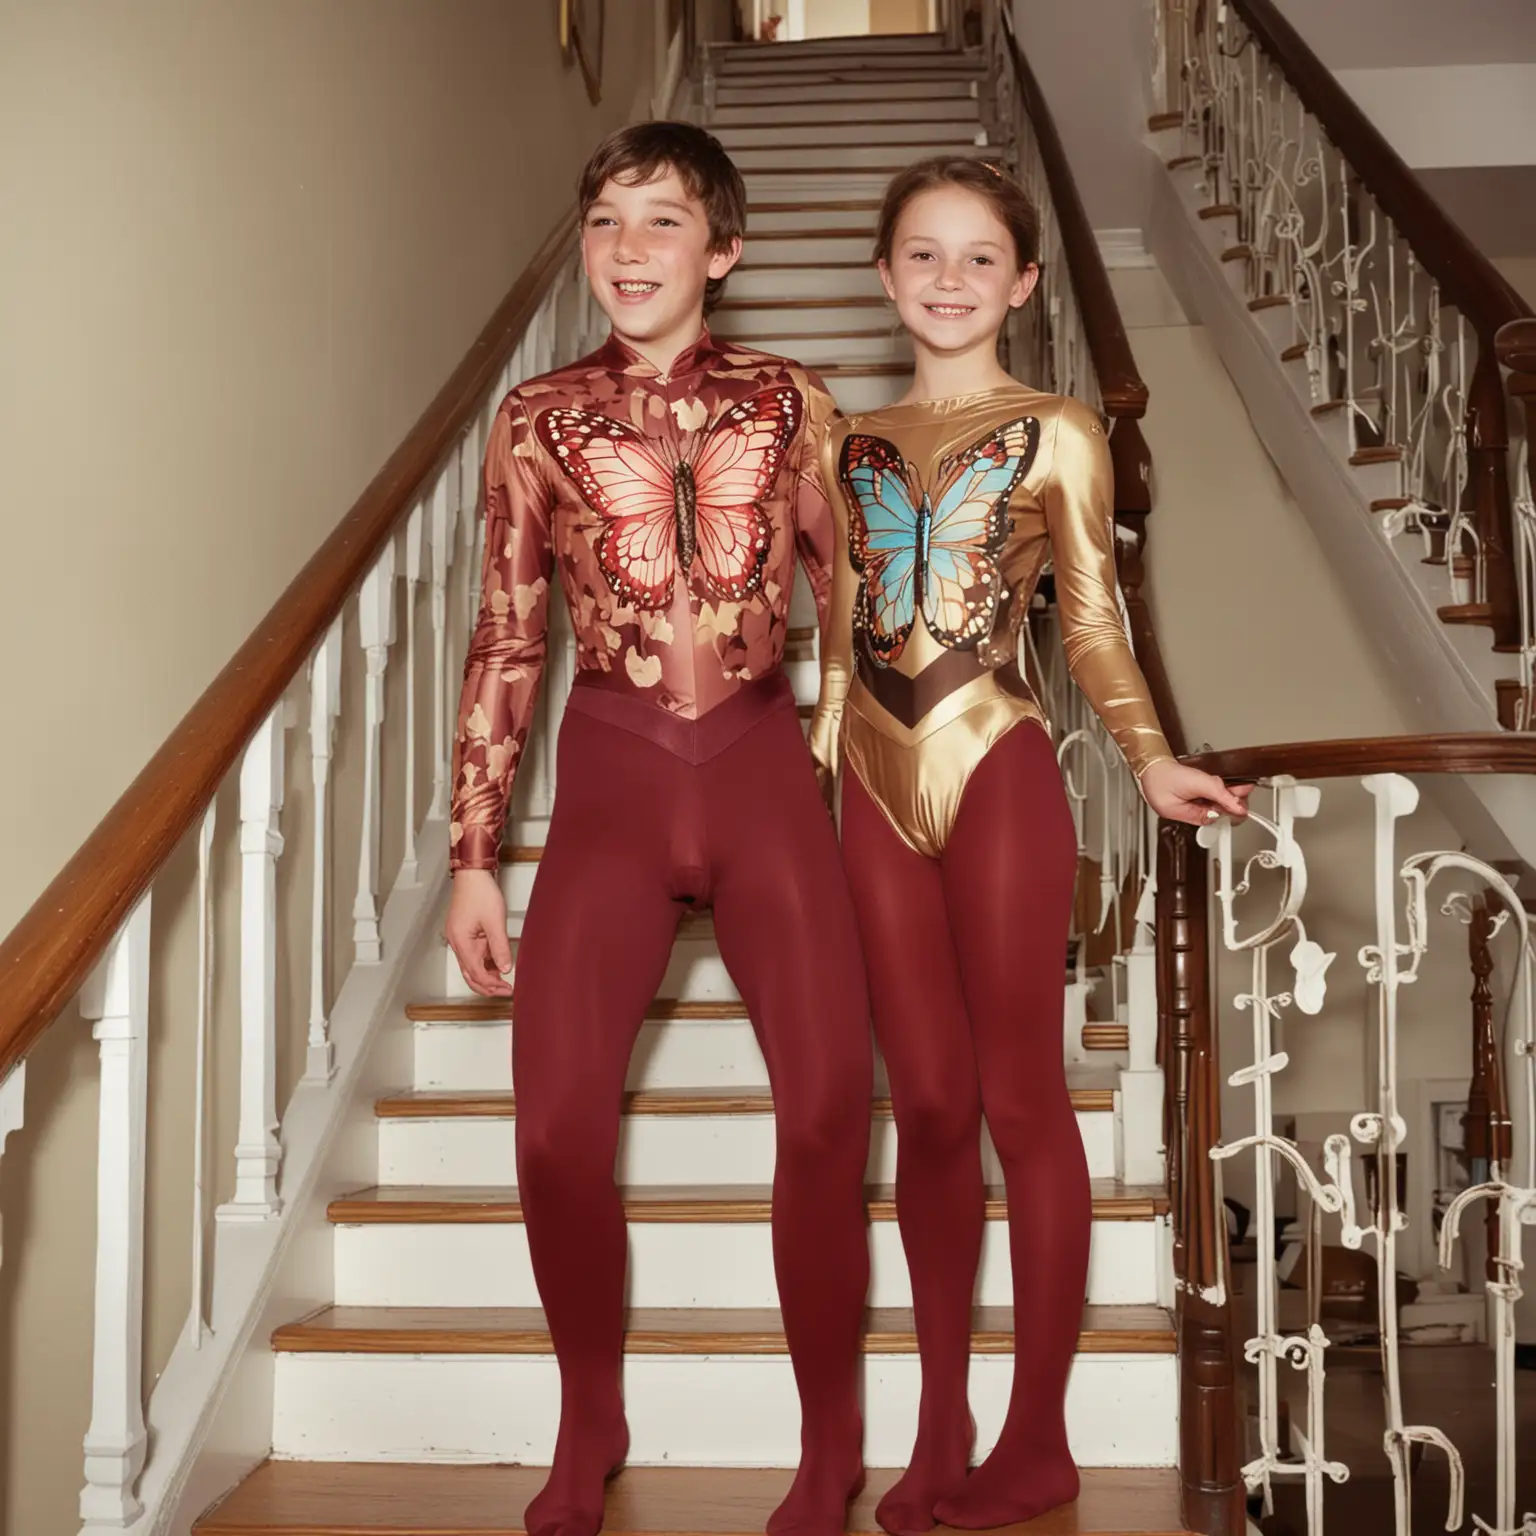 Teenage-Boy-and-Young-Woman-in-Butterfly-Costumes-Descending-Stairs-with-Smiles